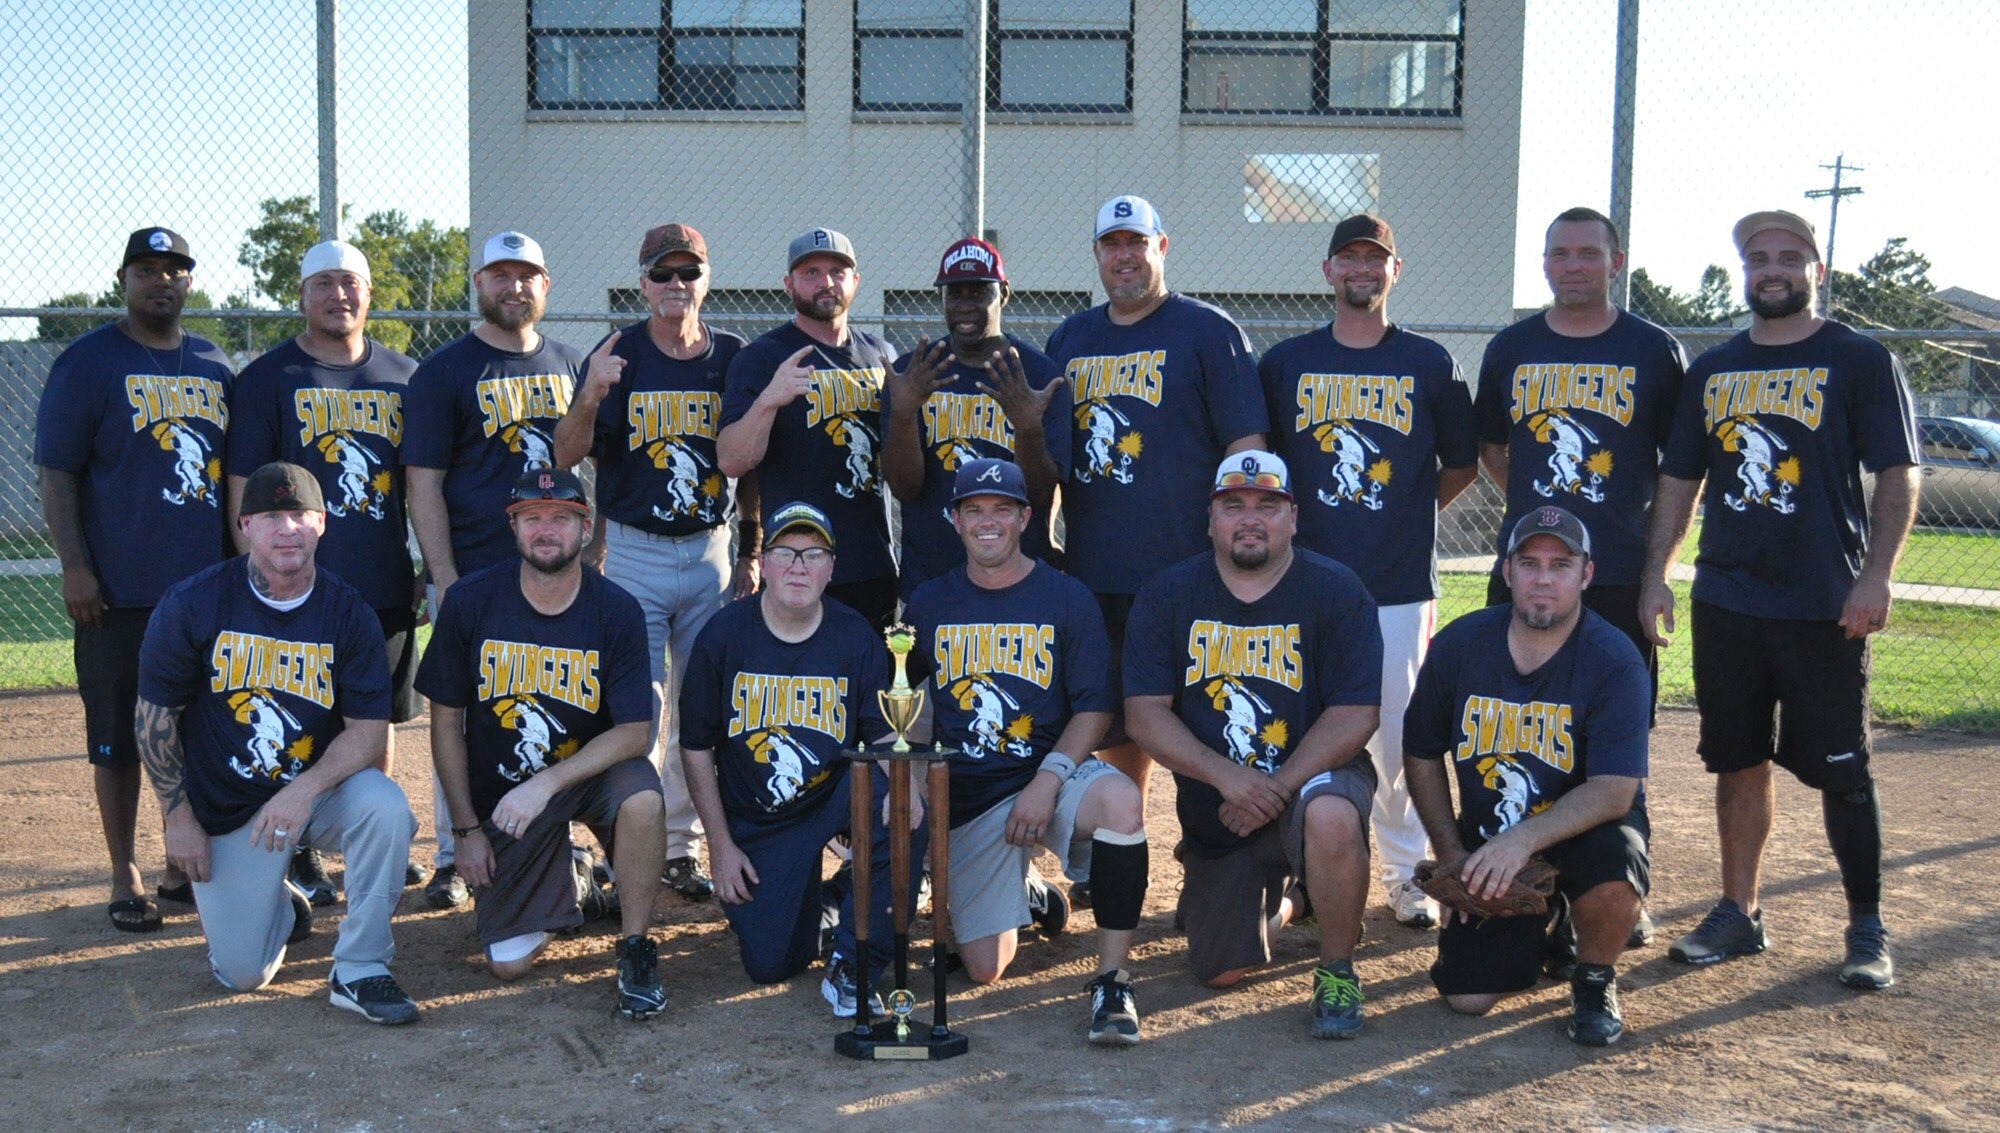 The Swingers gather at home plate Aug. 17 after winning two finals games, 20-15 and 10-6, against Davy Jones for the 2017 Intramural Softball League base championship.